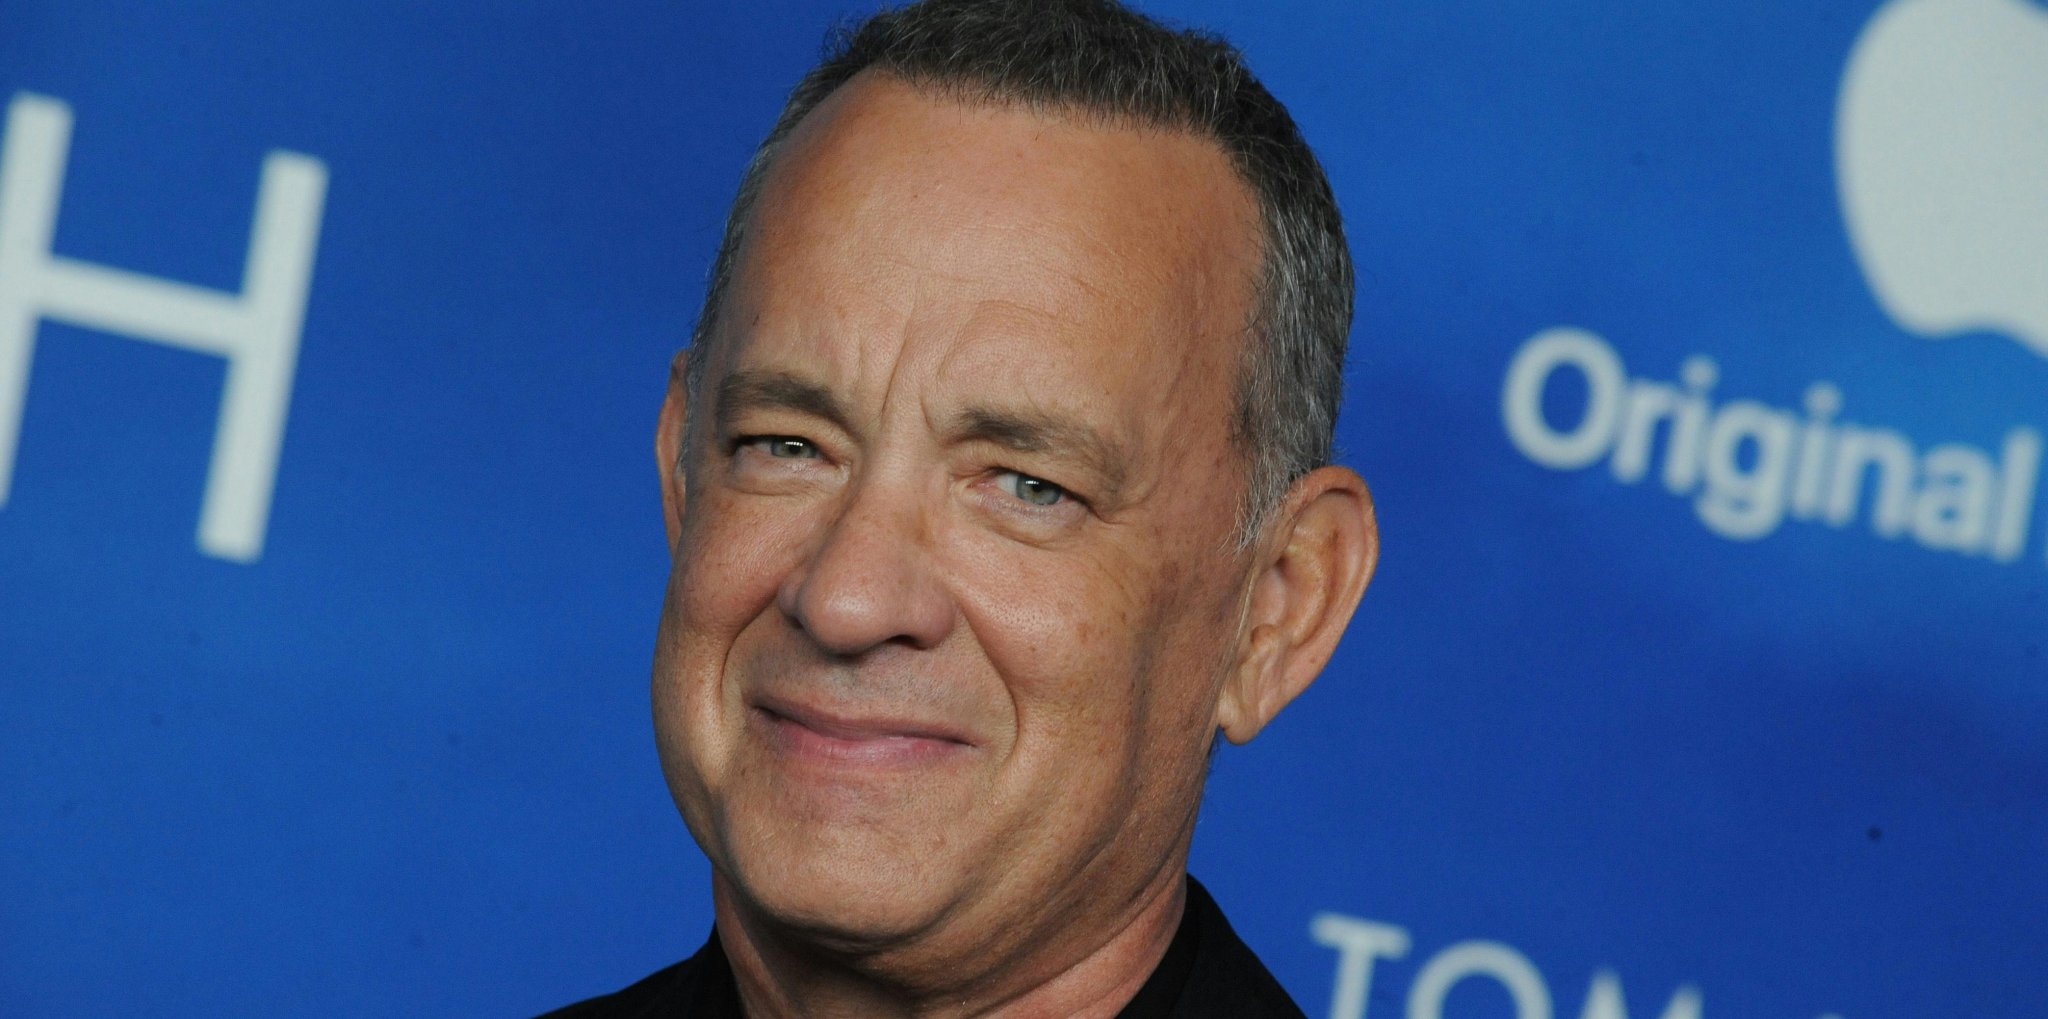 A deepfake of Tom Hanks endorsing a dental plan sparked a warning from the actor